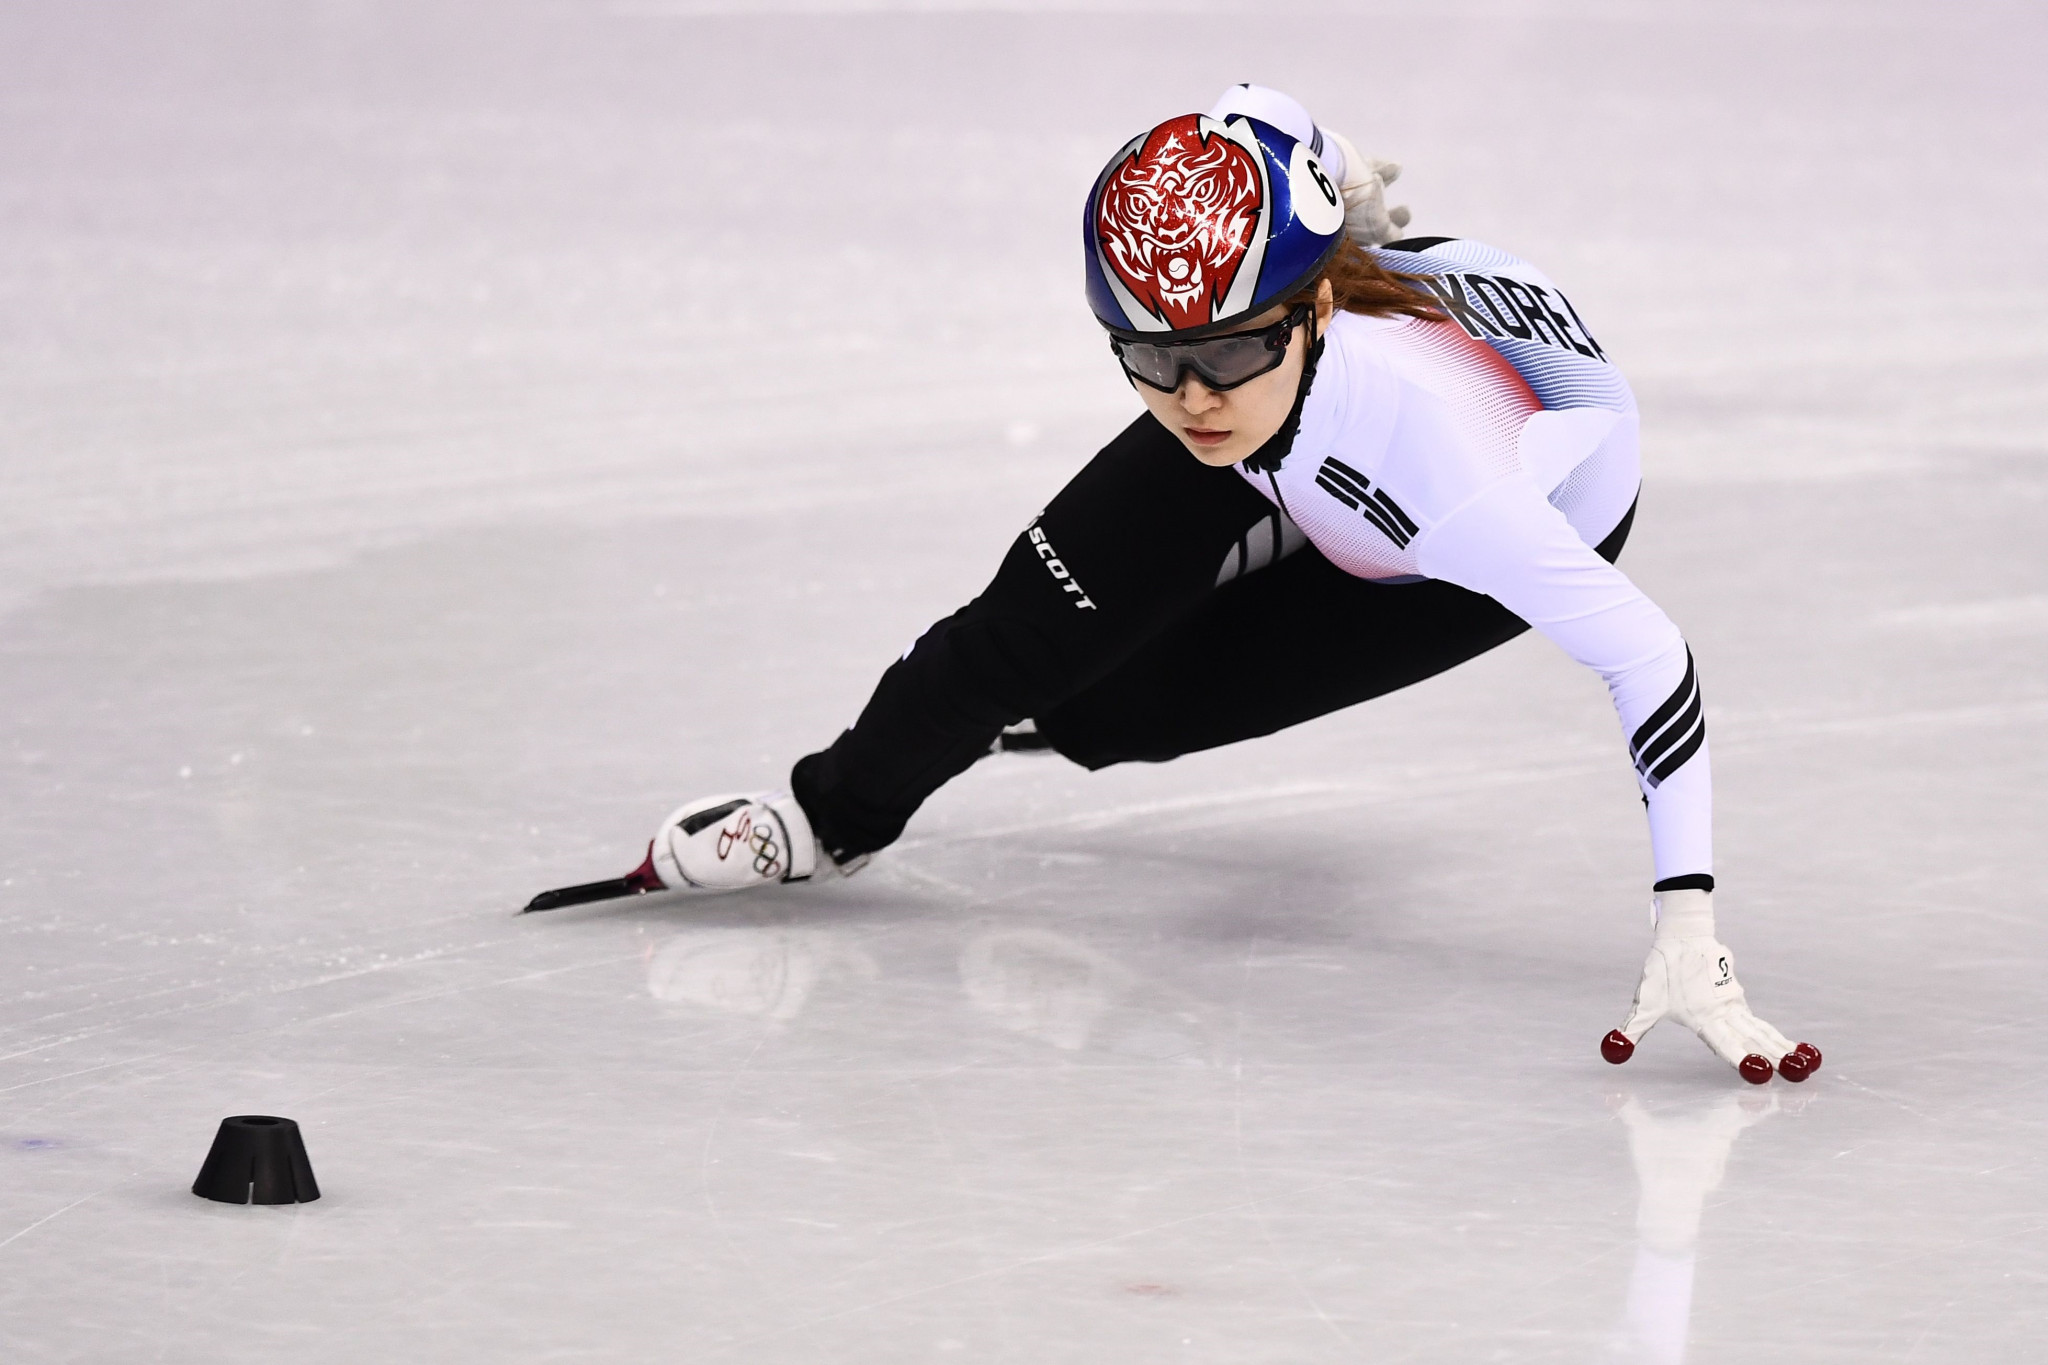 Olympic champion Choi lays down marker at ISU Short Track World Cup in Almaty